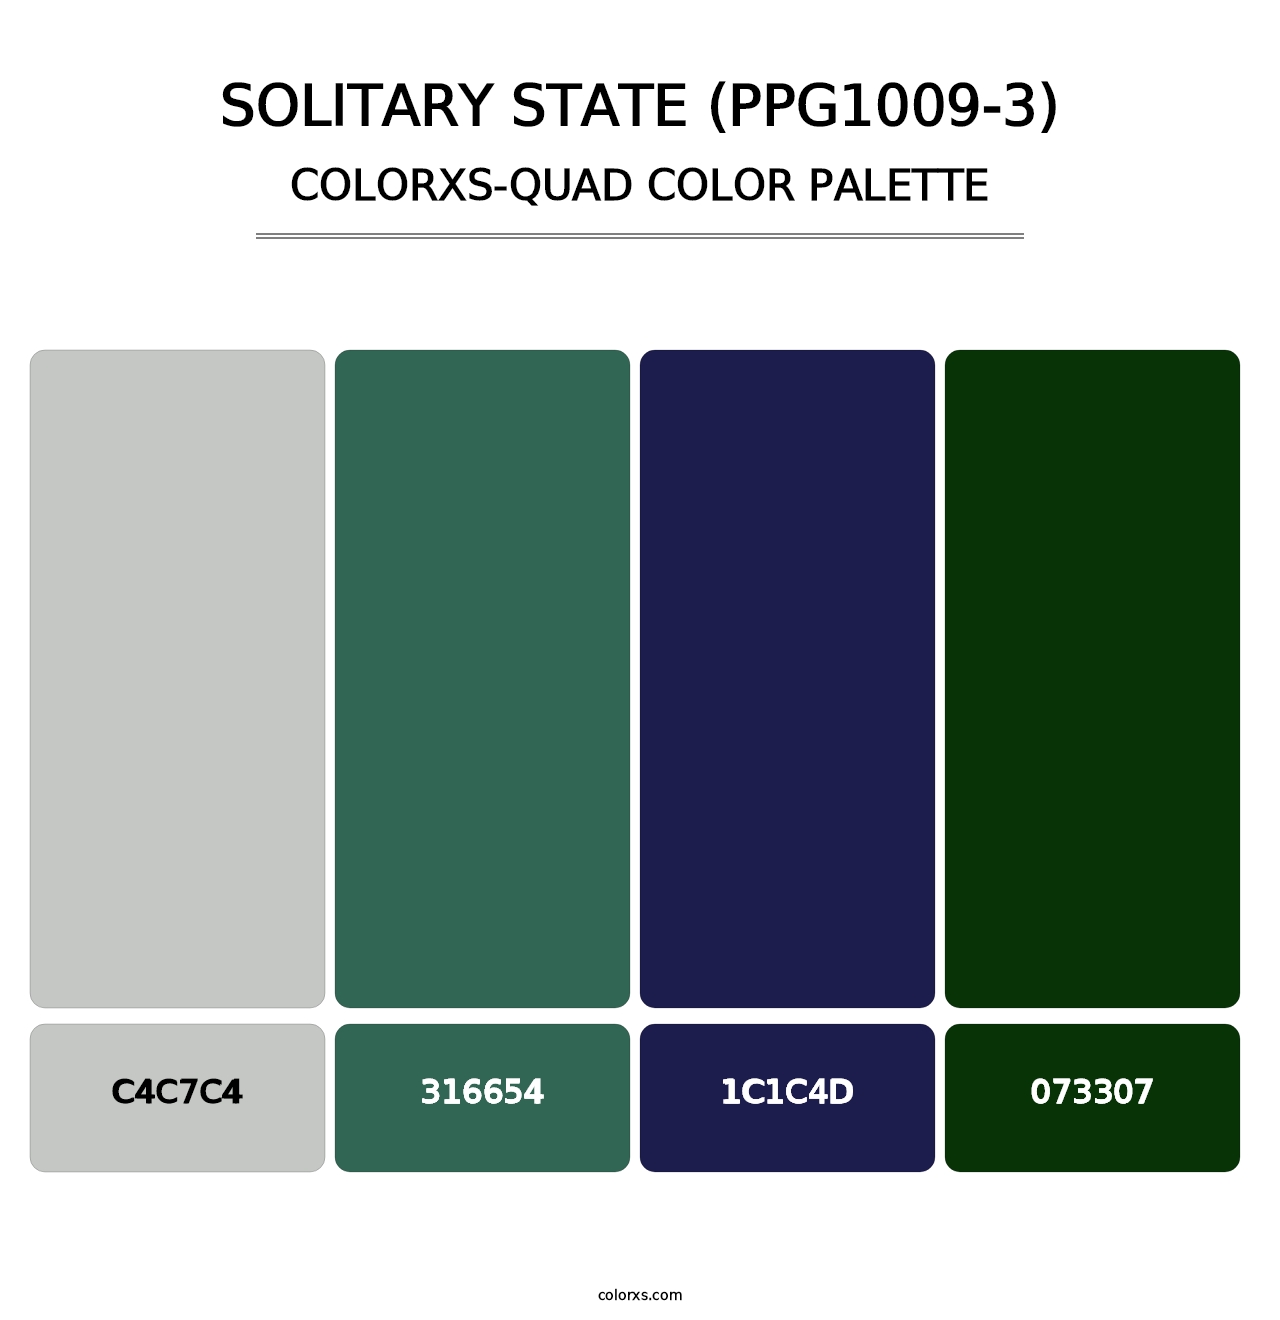 Solitary State (PPG1009-3) - Colorxs Quad Palette